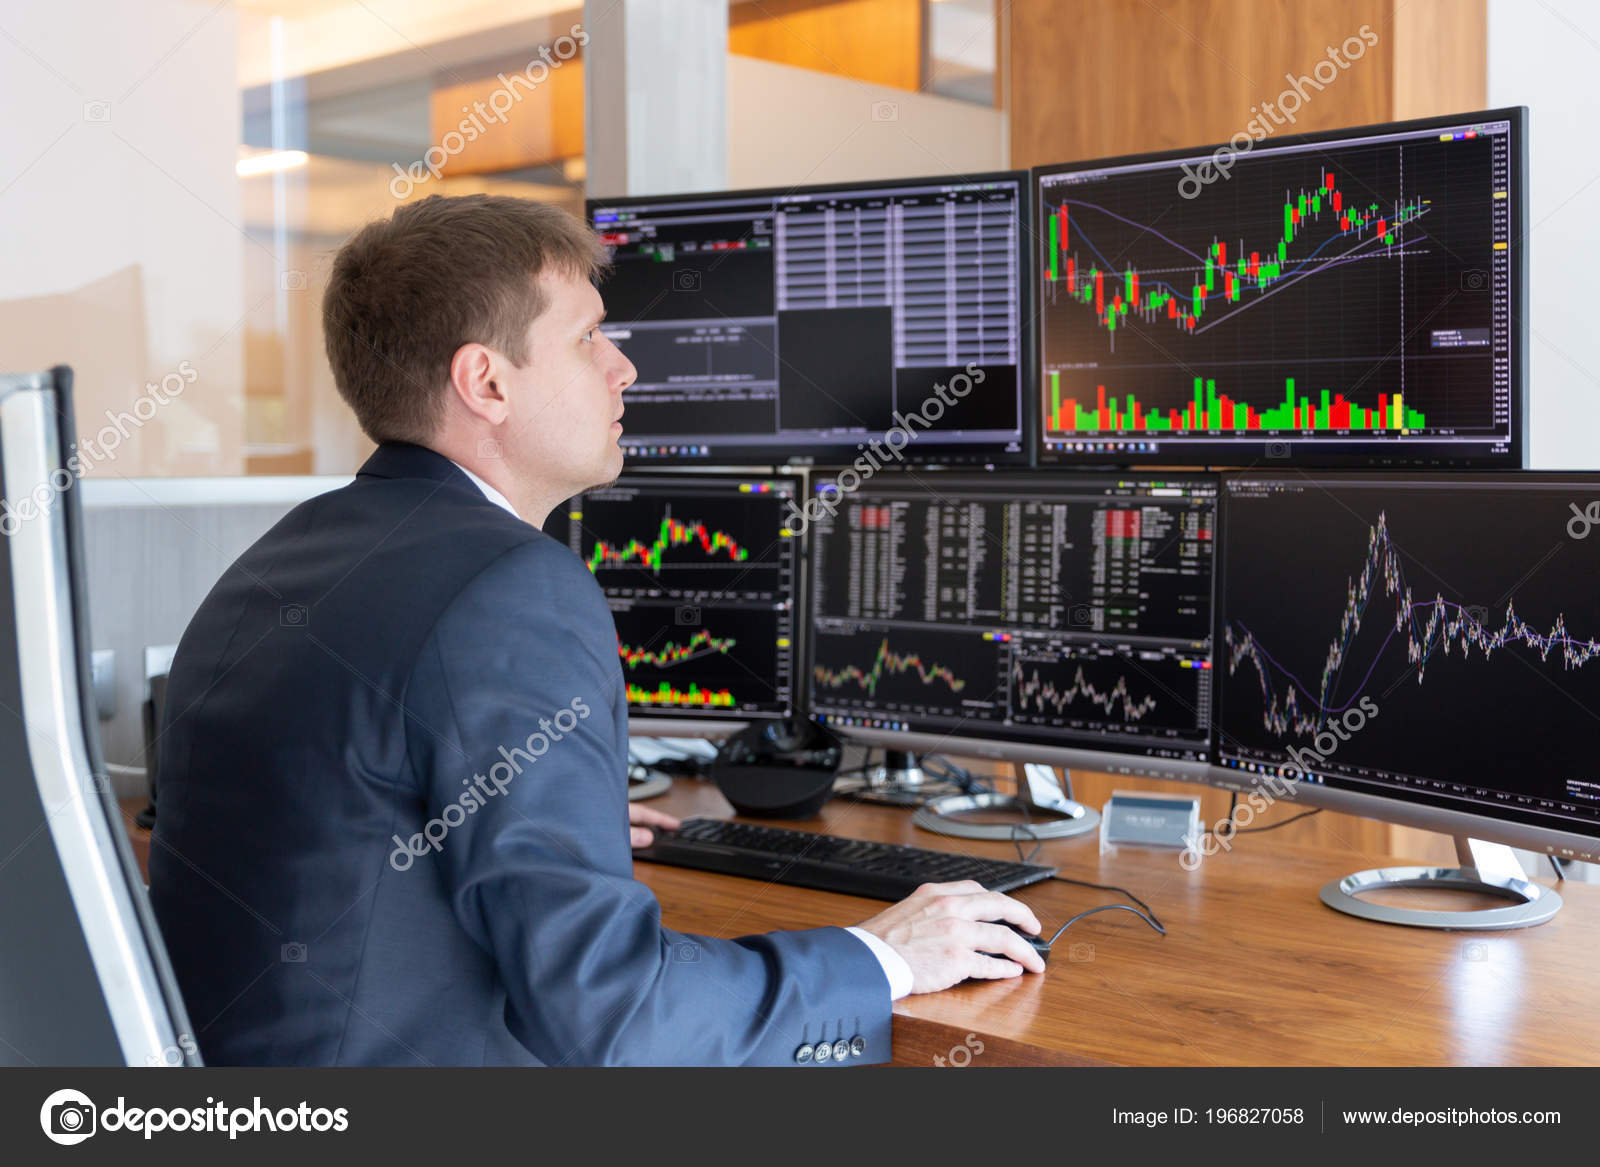 Stock Trader Looking At Computer Screens In Trdading Office